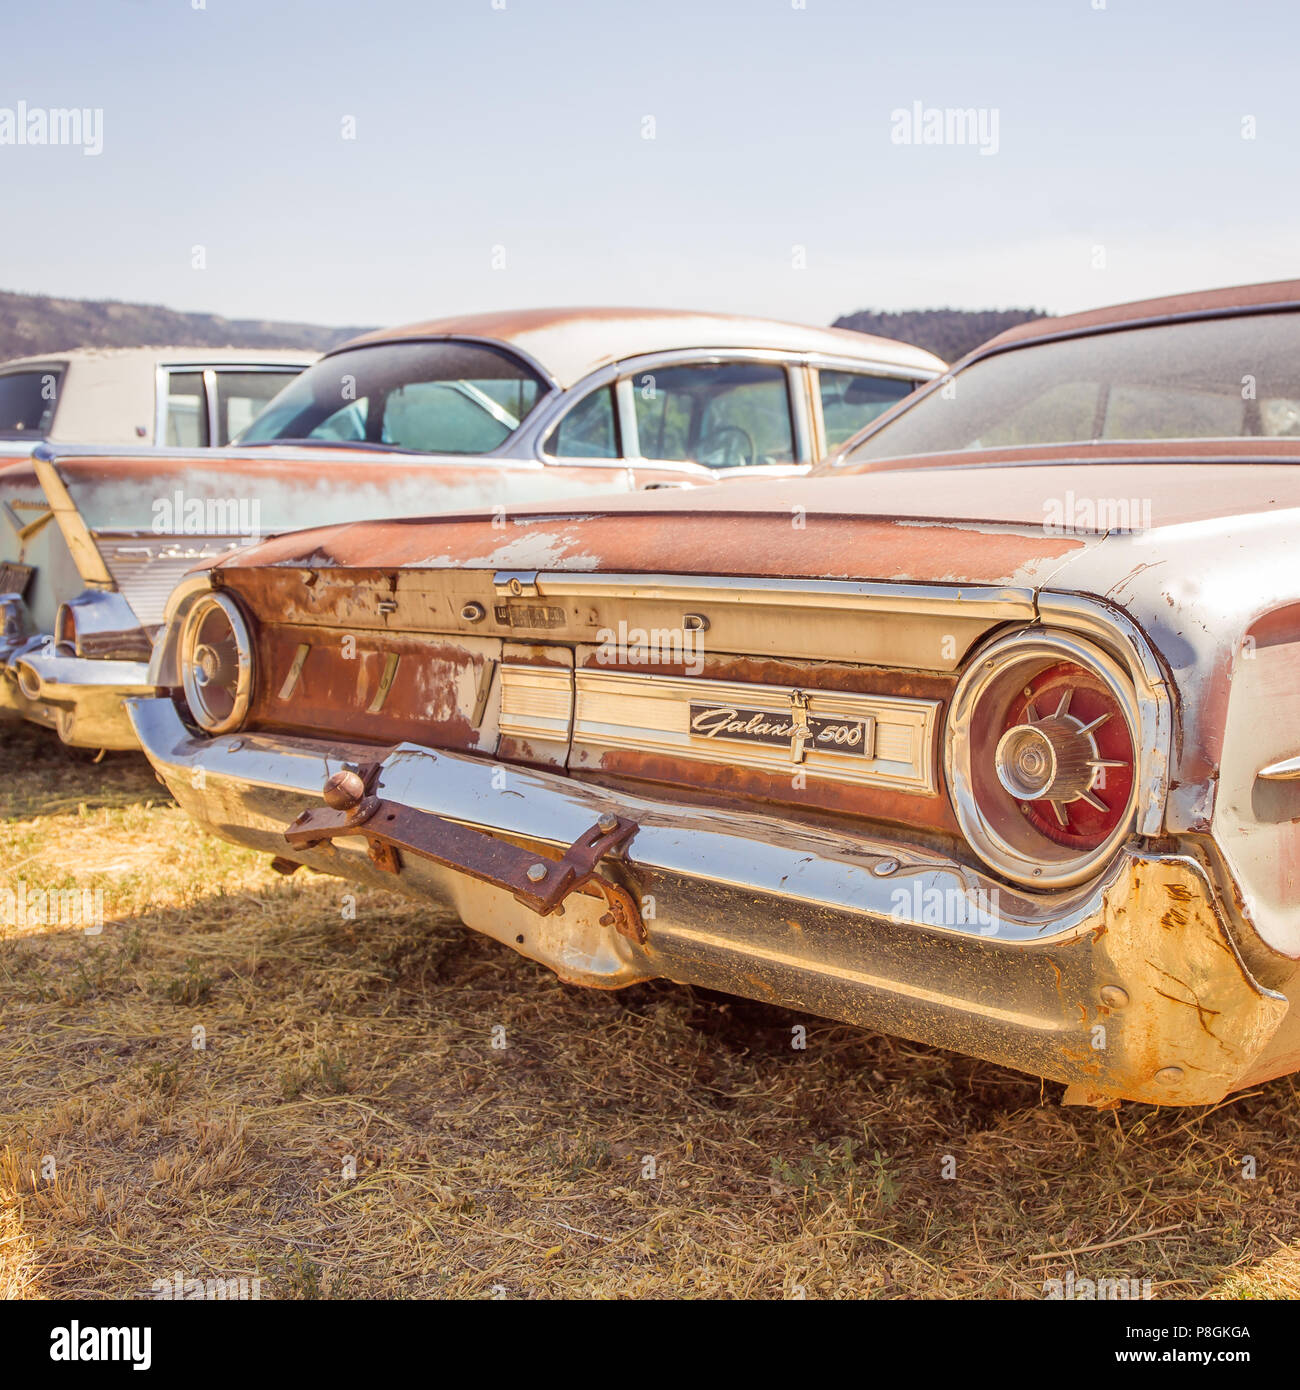 A row of old cars at a junkyard in Southwestern United States, Glendale, Utah featuring a rusty old Ford Galaxie 500. Stock Photo